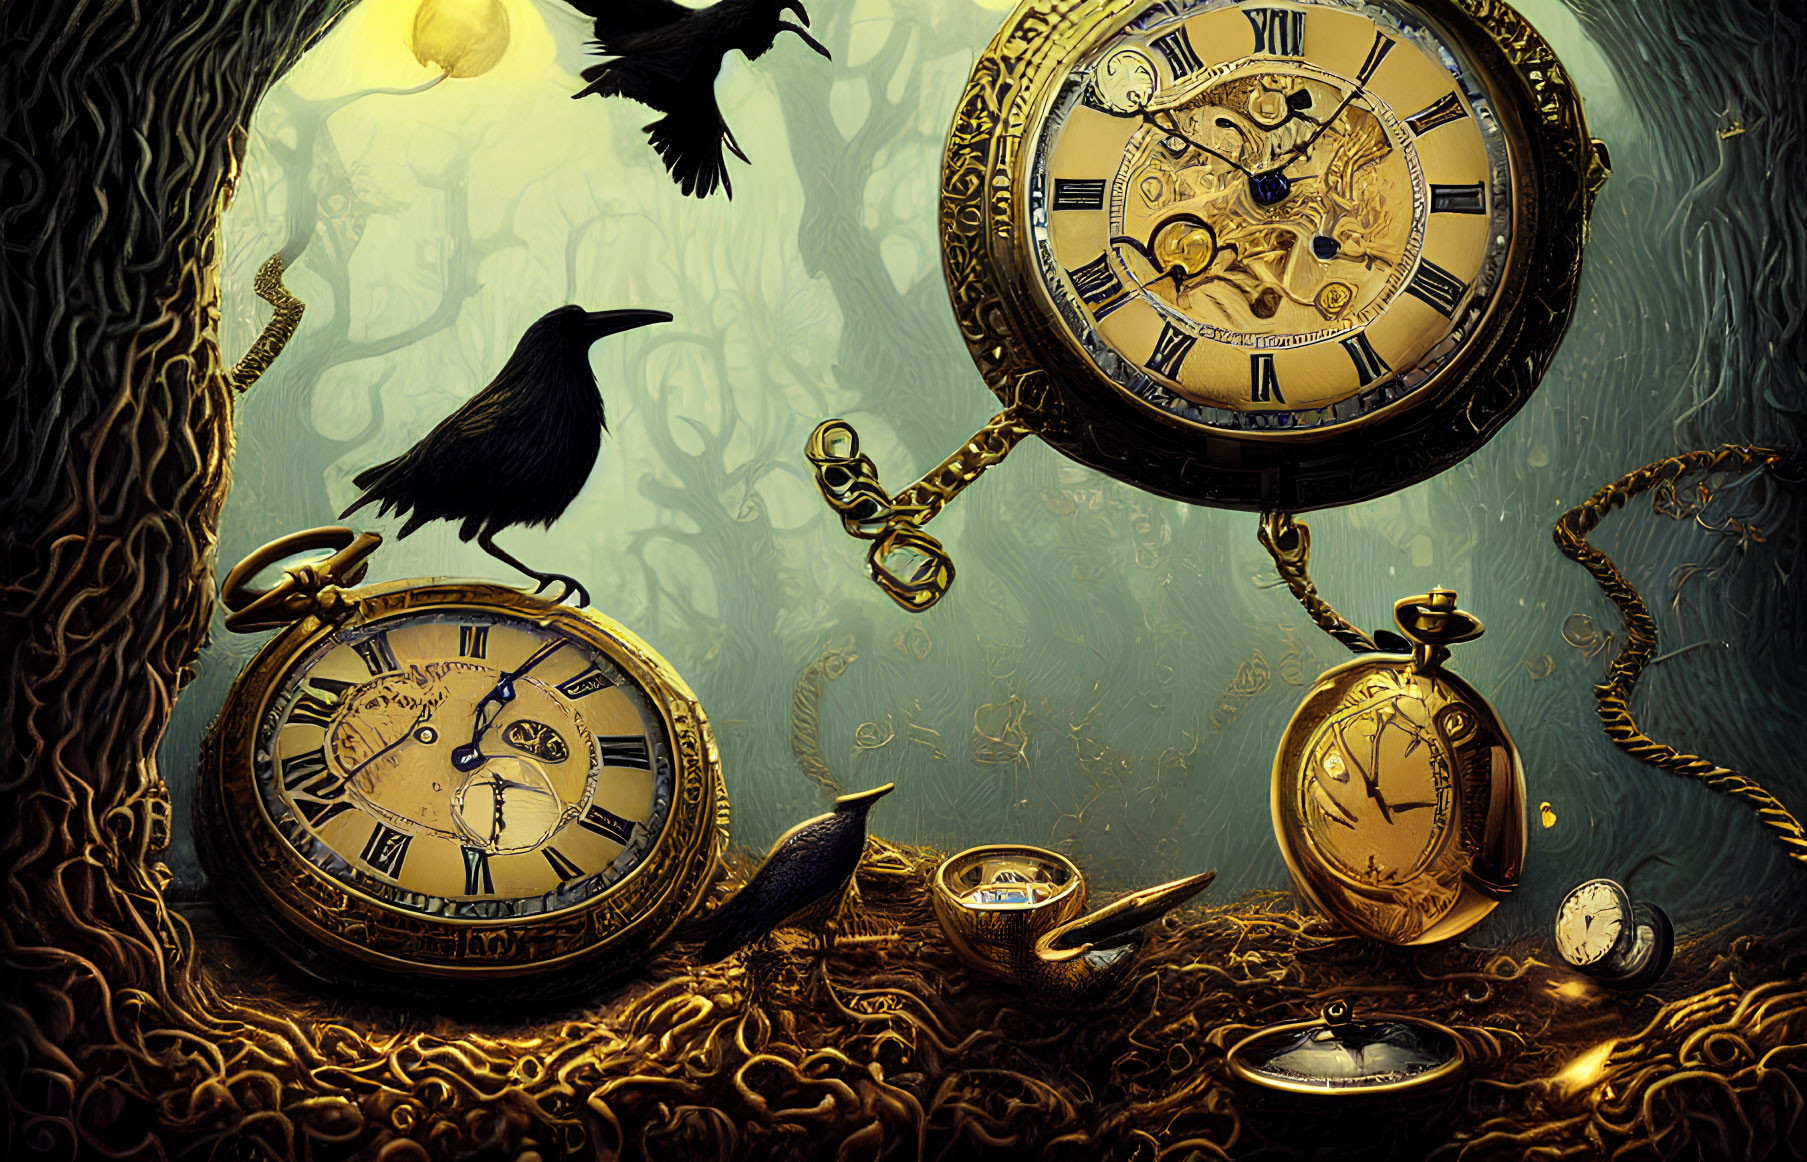 Mystical forest scene with floating pocket watches and crow among timepieces.